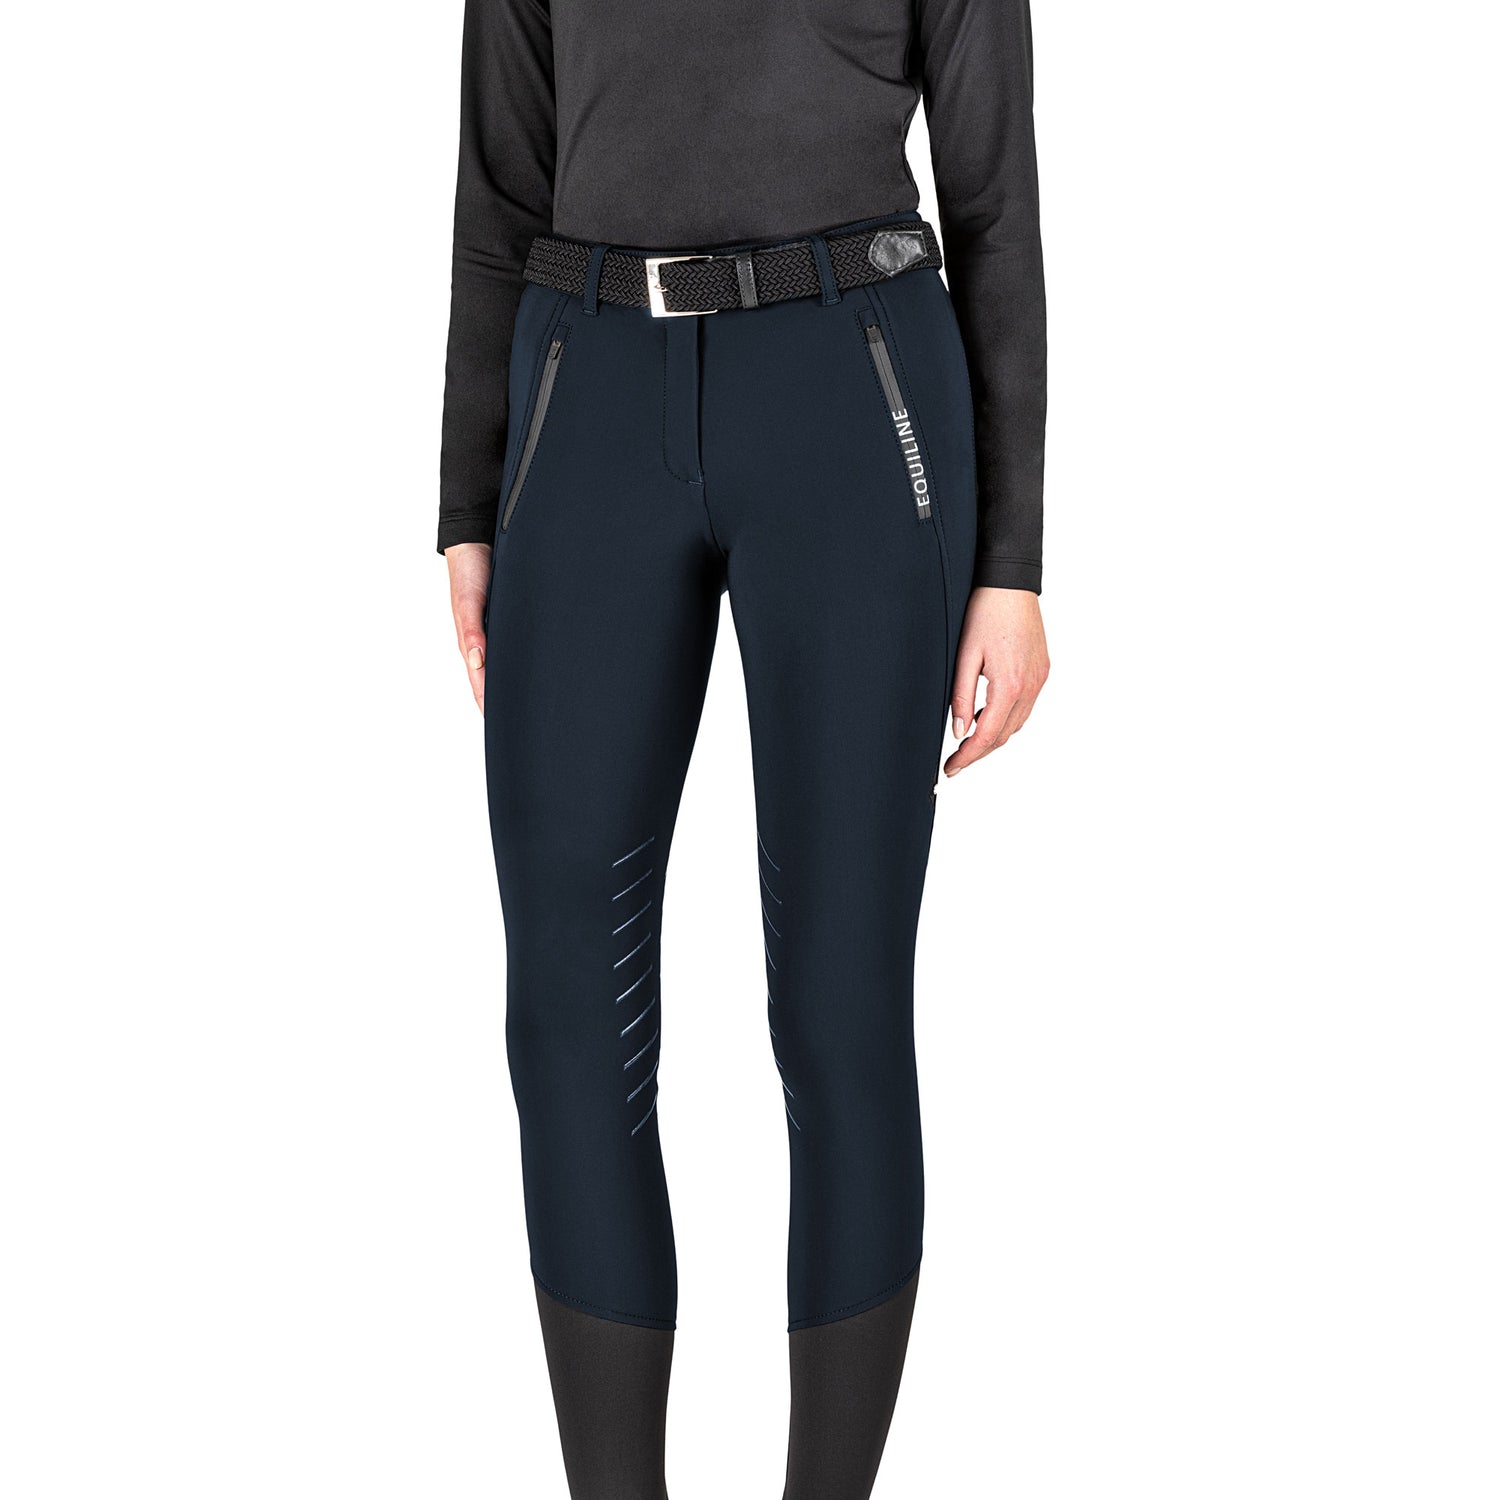 The Equiline Chassisk Womens breeches offer style and comfort when riding.  These breeches are made from the new B-Move material which offers breathability and comfort at high performance. 